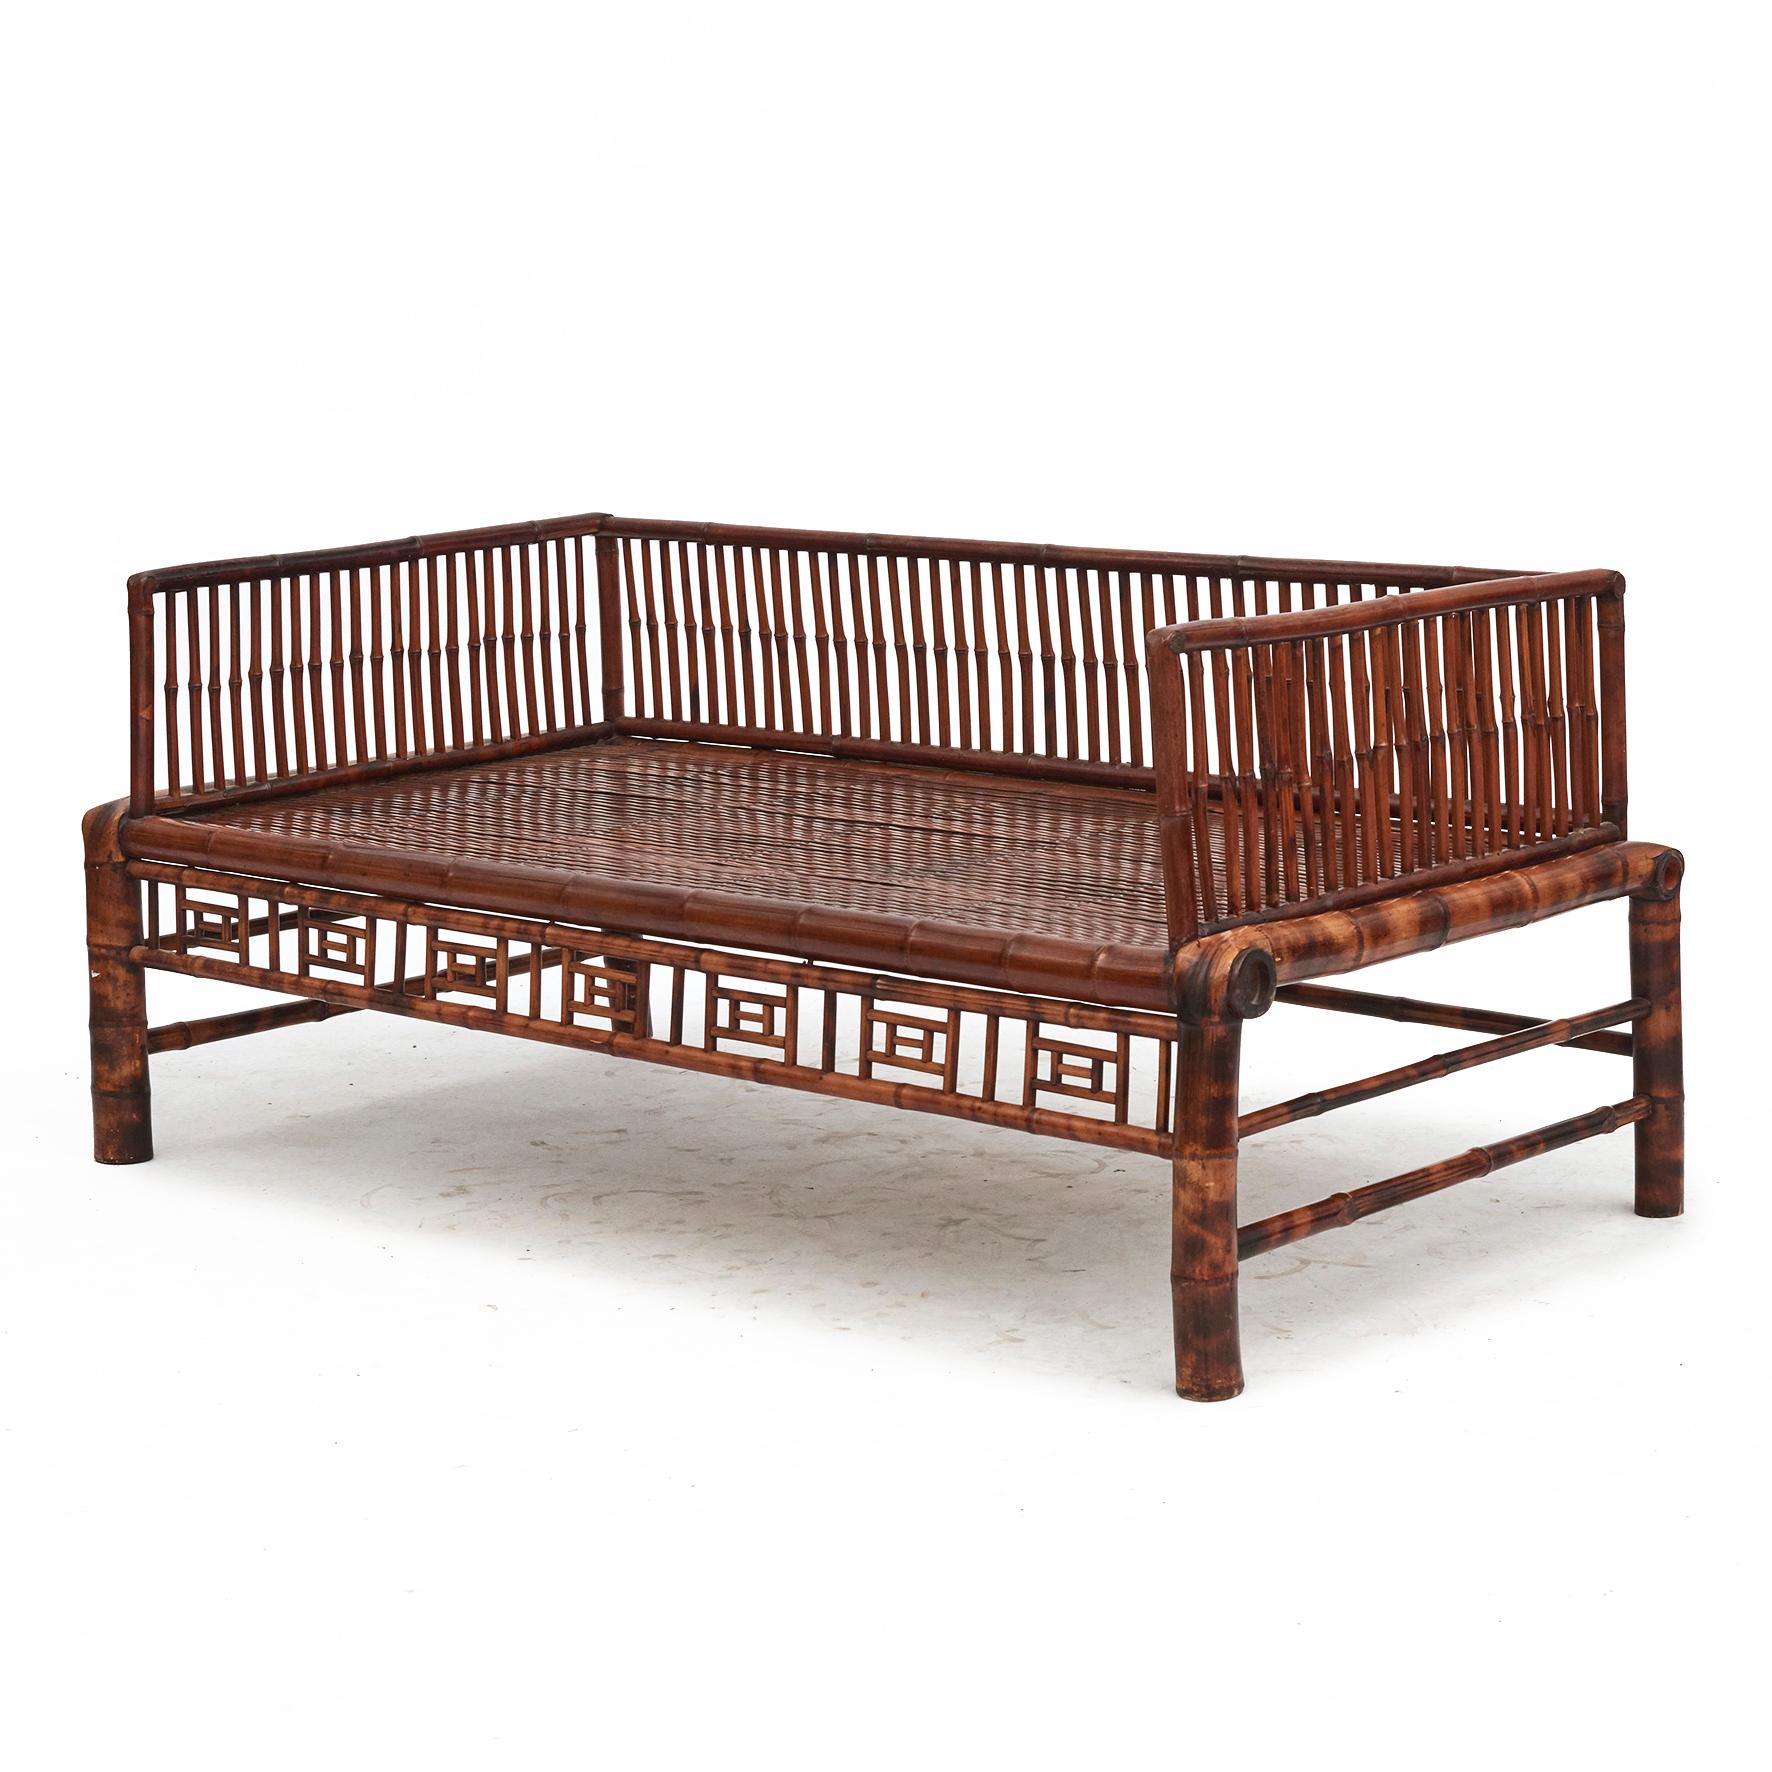 Daybed made of flamed bamboo, called 